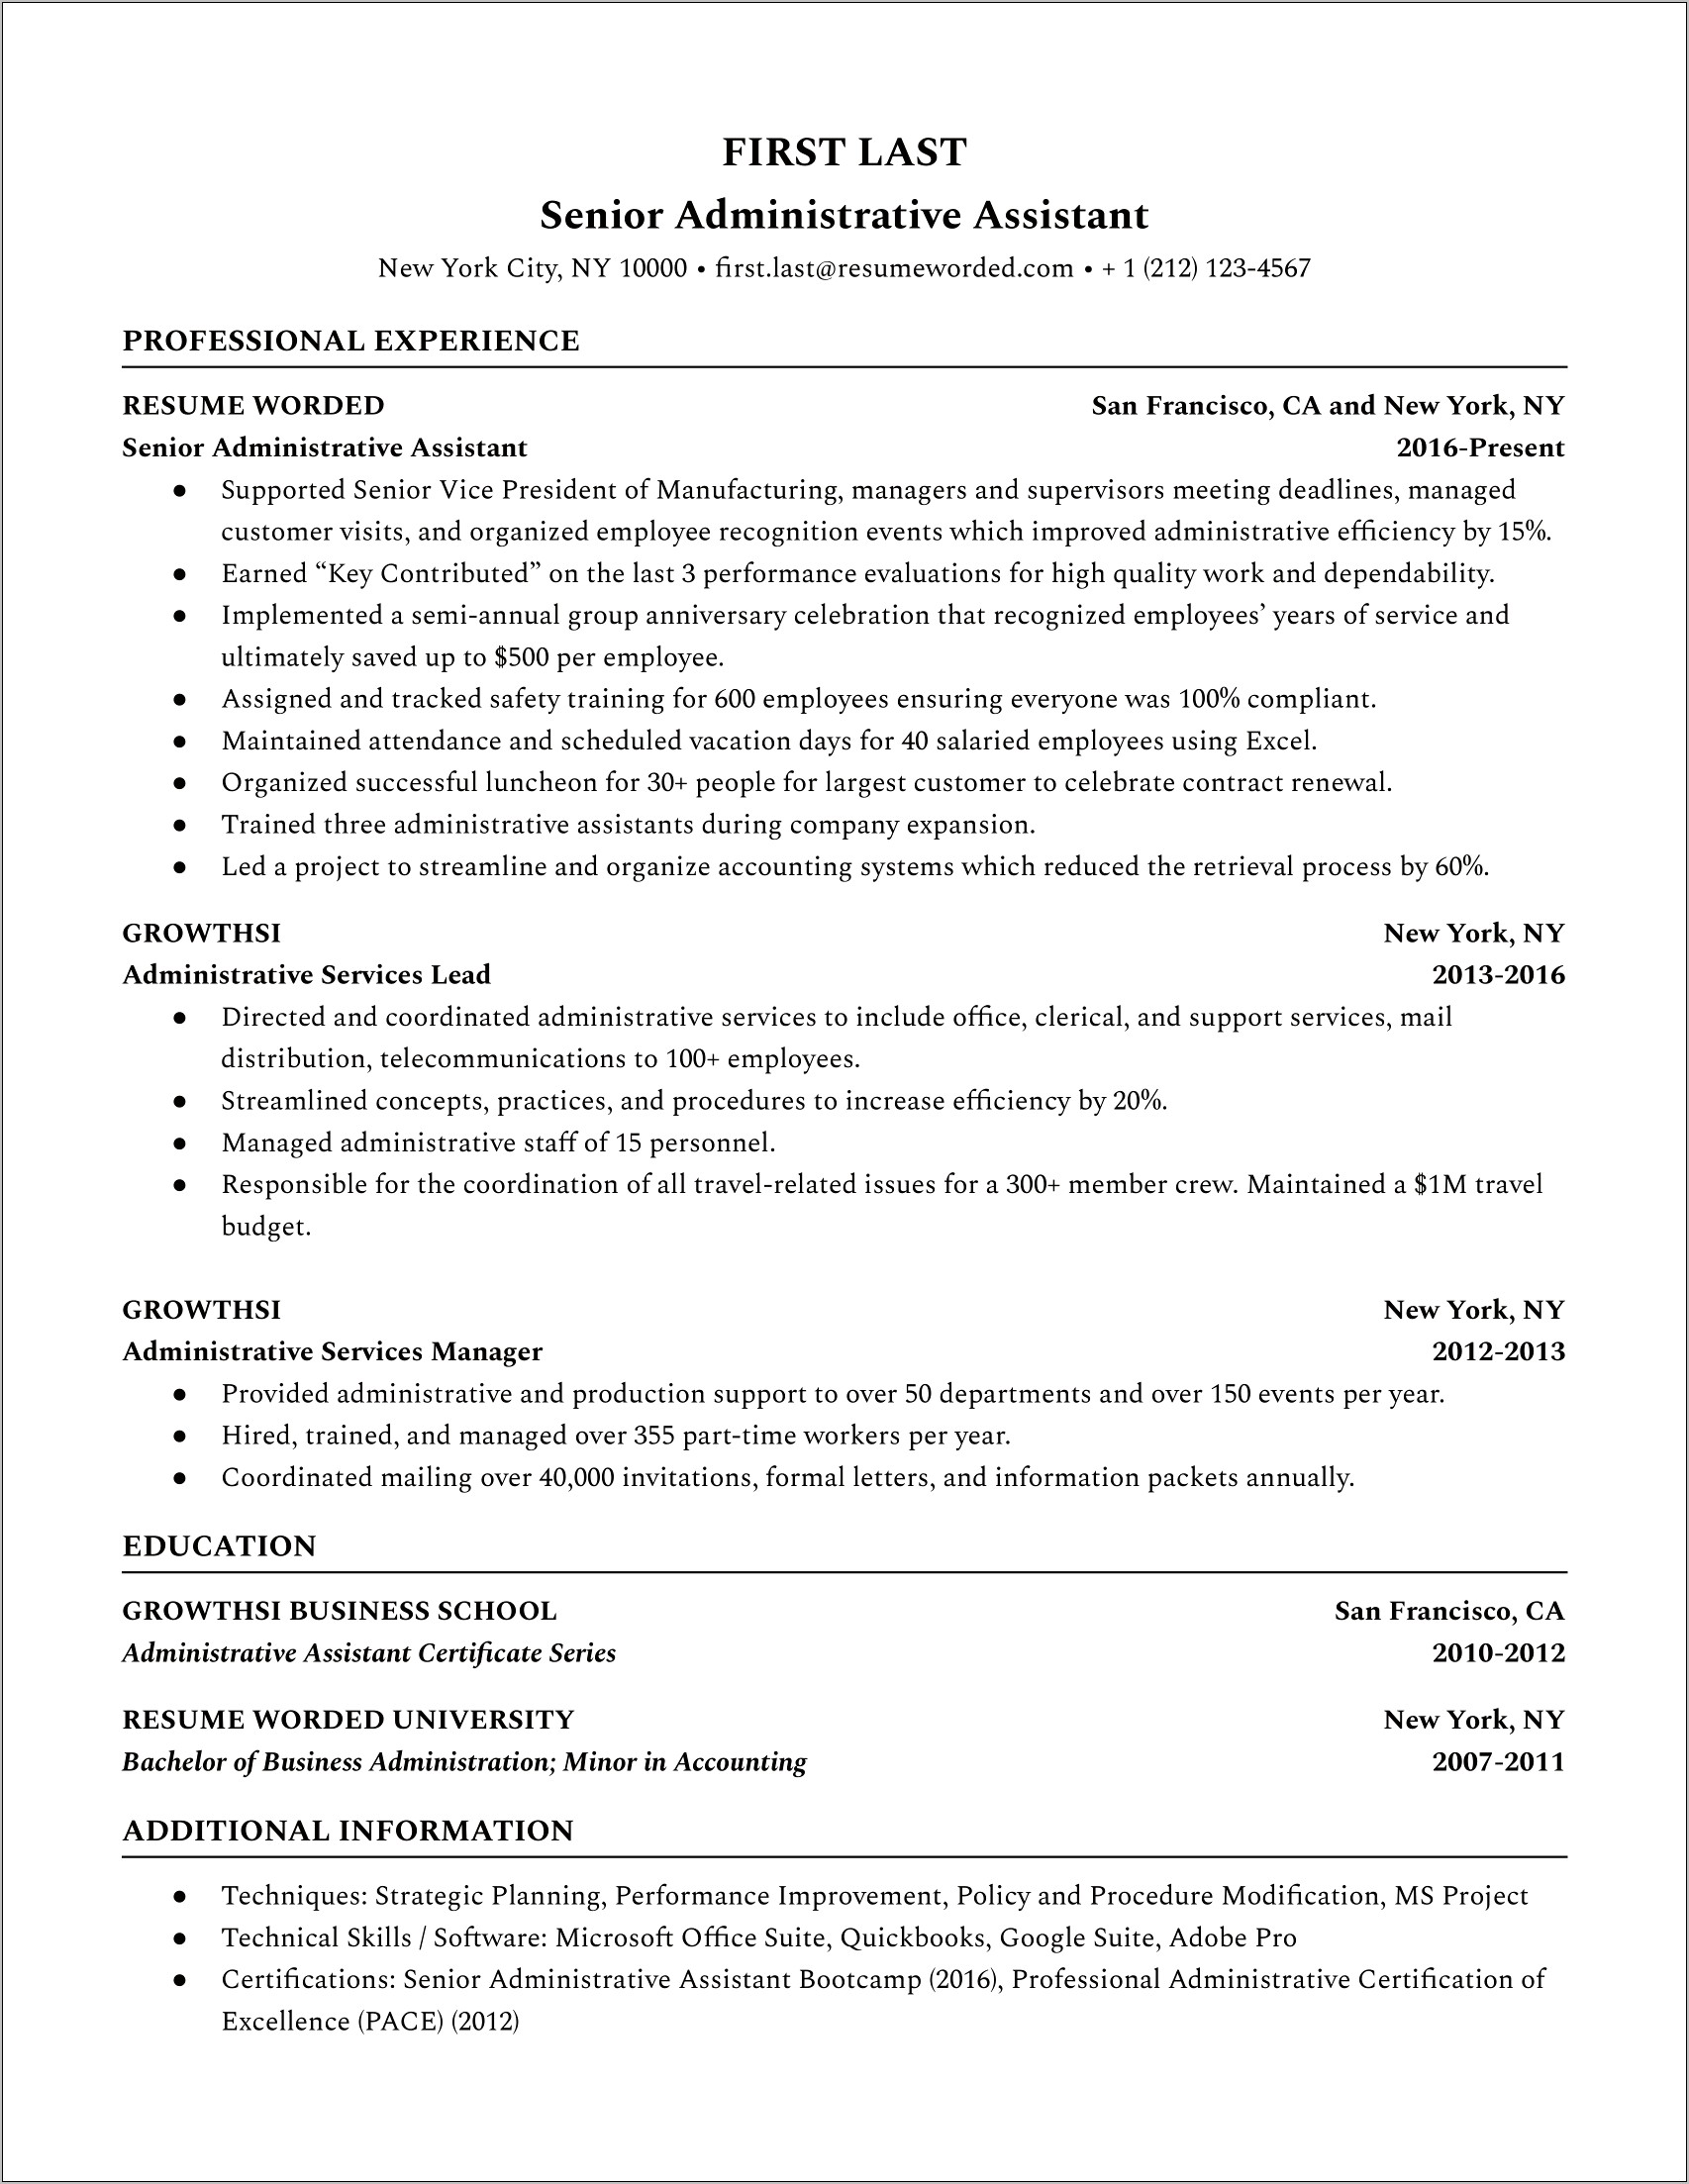 Sample Formal Letter Template Administrtive Assistantwith Resume